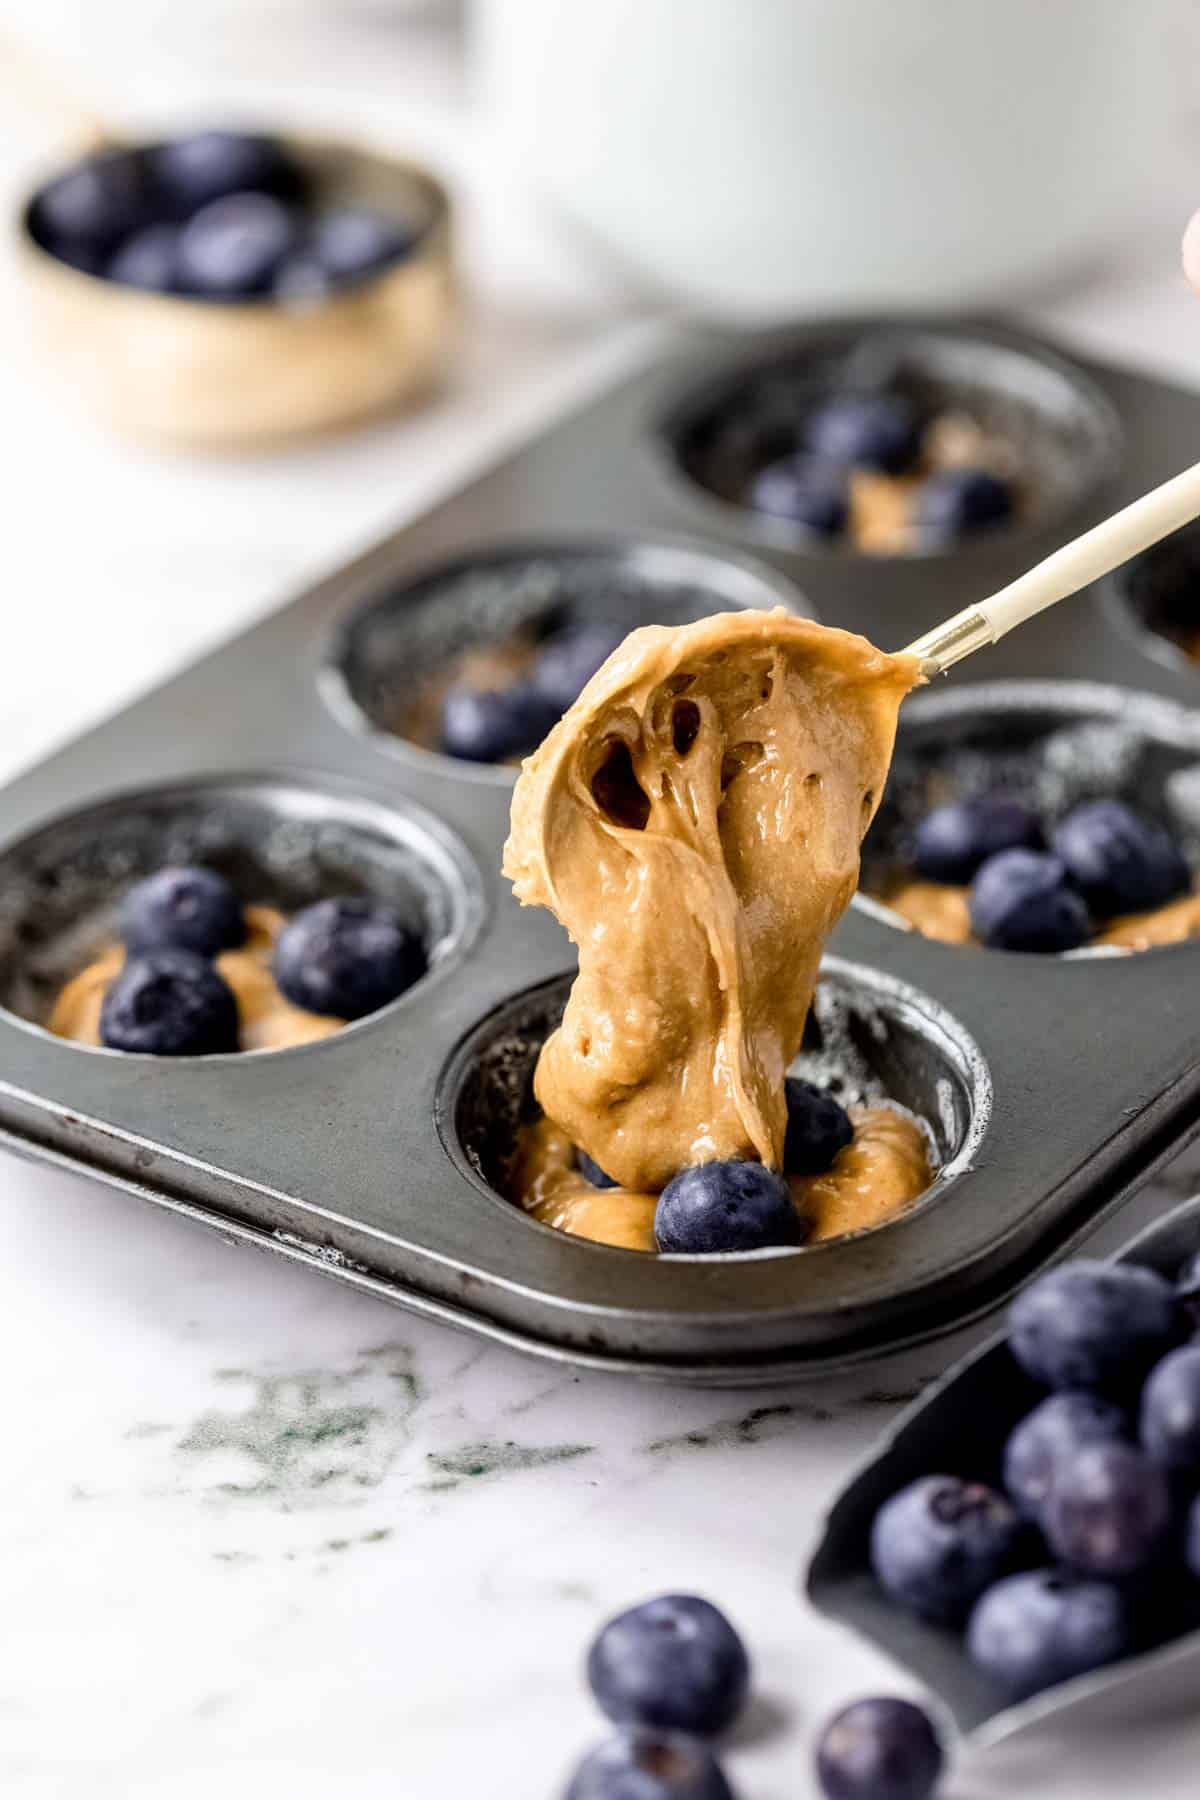 A spoon drops flourless muffin batter over top of another layer of batter and blueberries inside the well of a muffin pan.